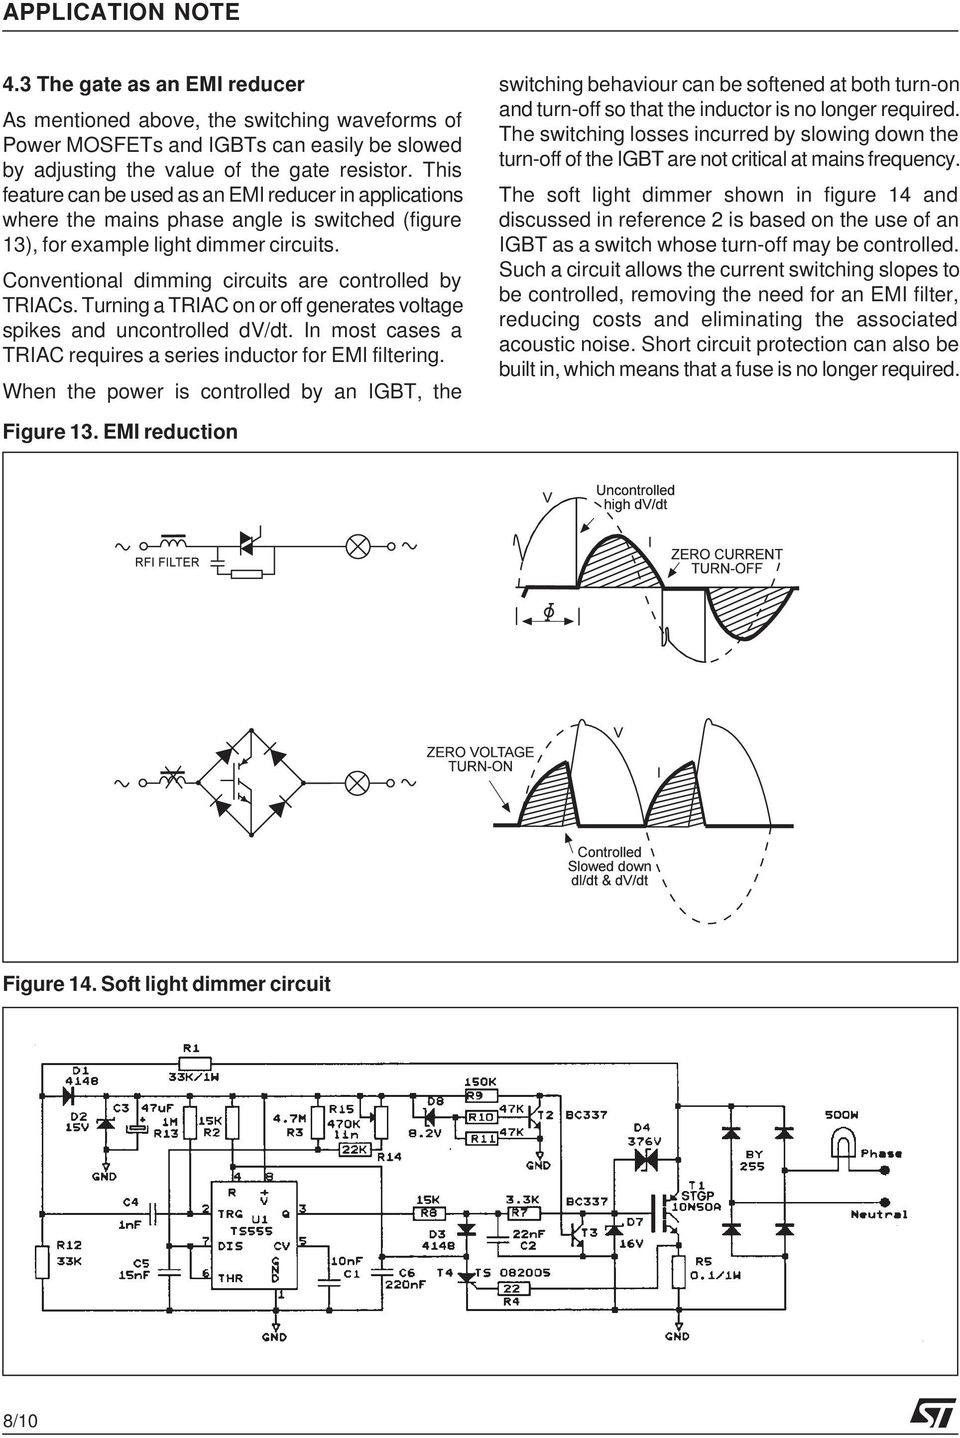 Conventional dimming circuits are controlled by TRIACs. Turning a TRIAC on or off generates voltage spikes and uncontrolled dv/dt. In most cases a TRIAC requires a series inductor for EMI filtering.